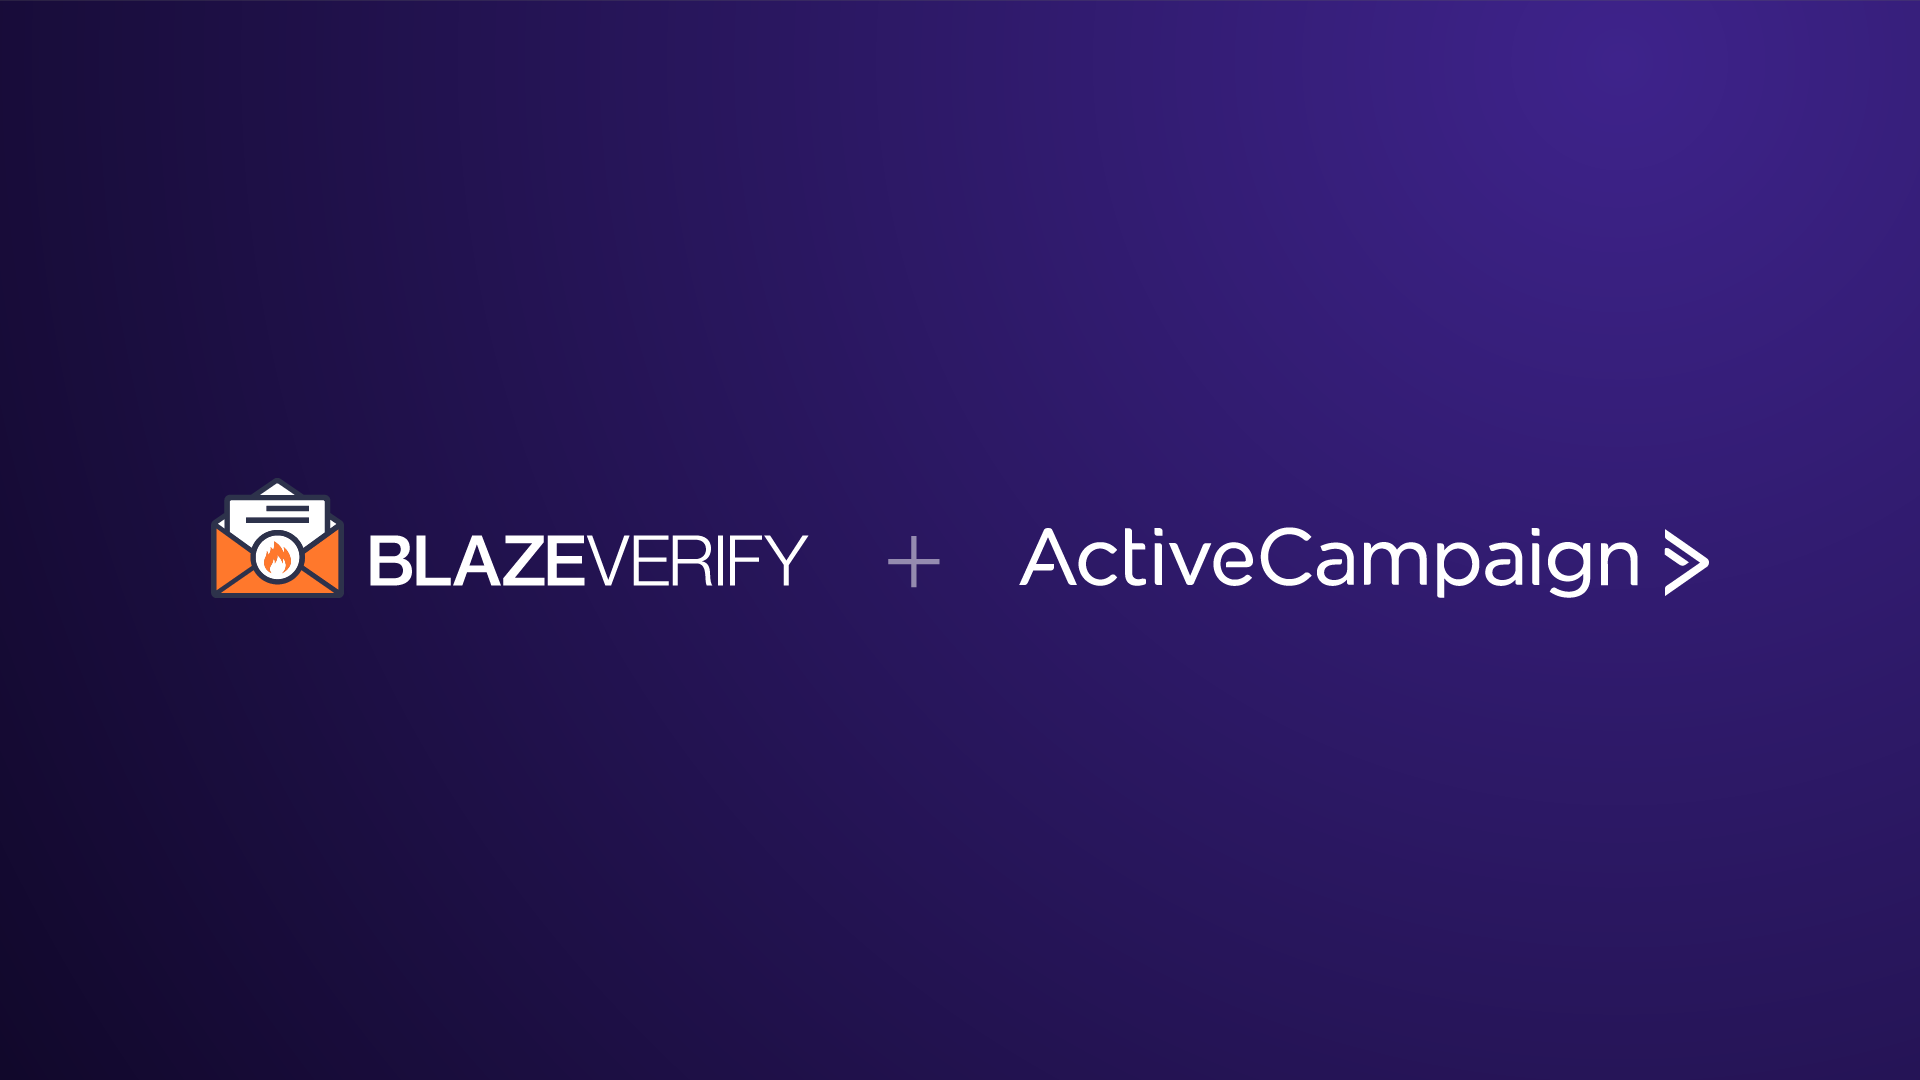 Blaze Verify Partners With ActiveCampaign to Automate Email Verification